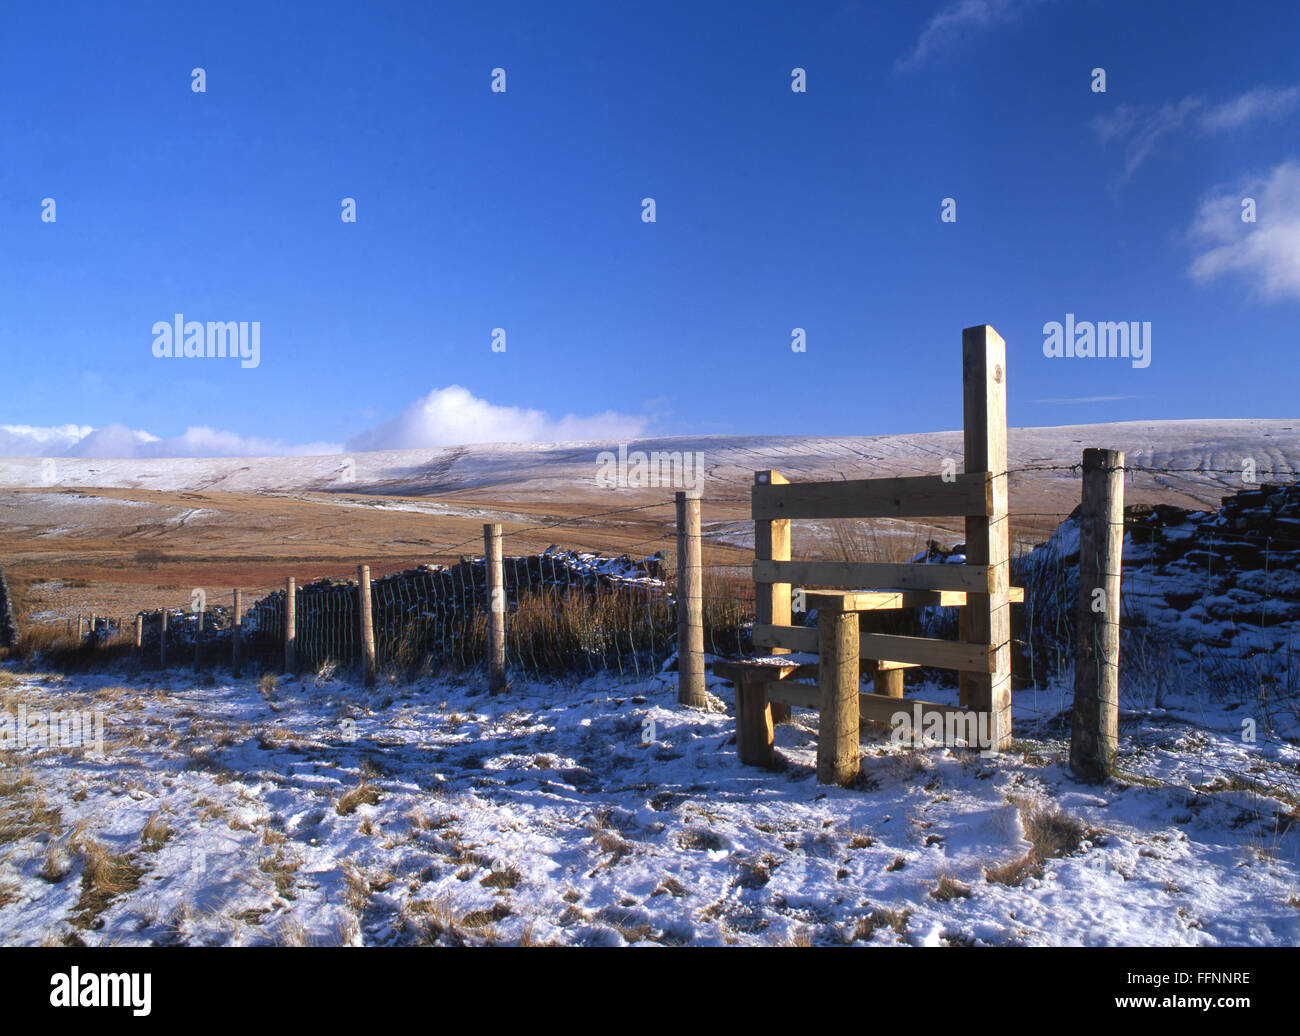 Wooden stile and fence in snow Blaen Llia in background Fforest Fawr Geopark Brecon Beacons National Park Powys Wales UK Stock Photo